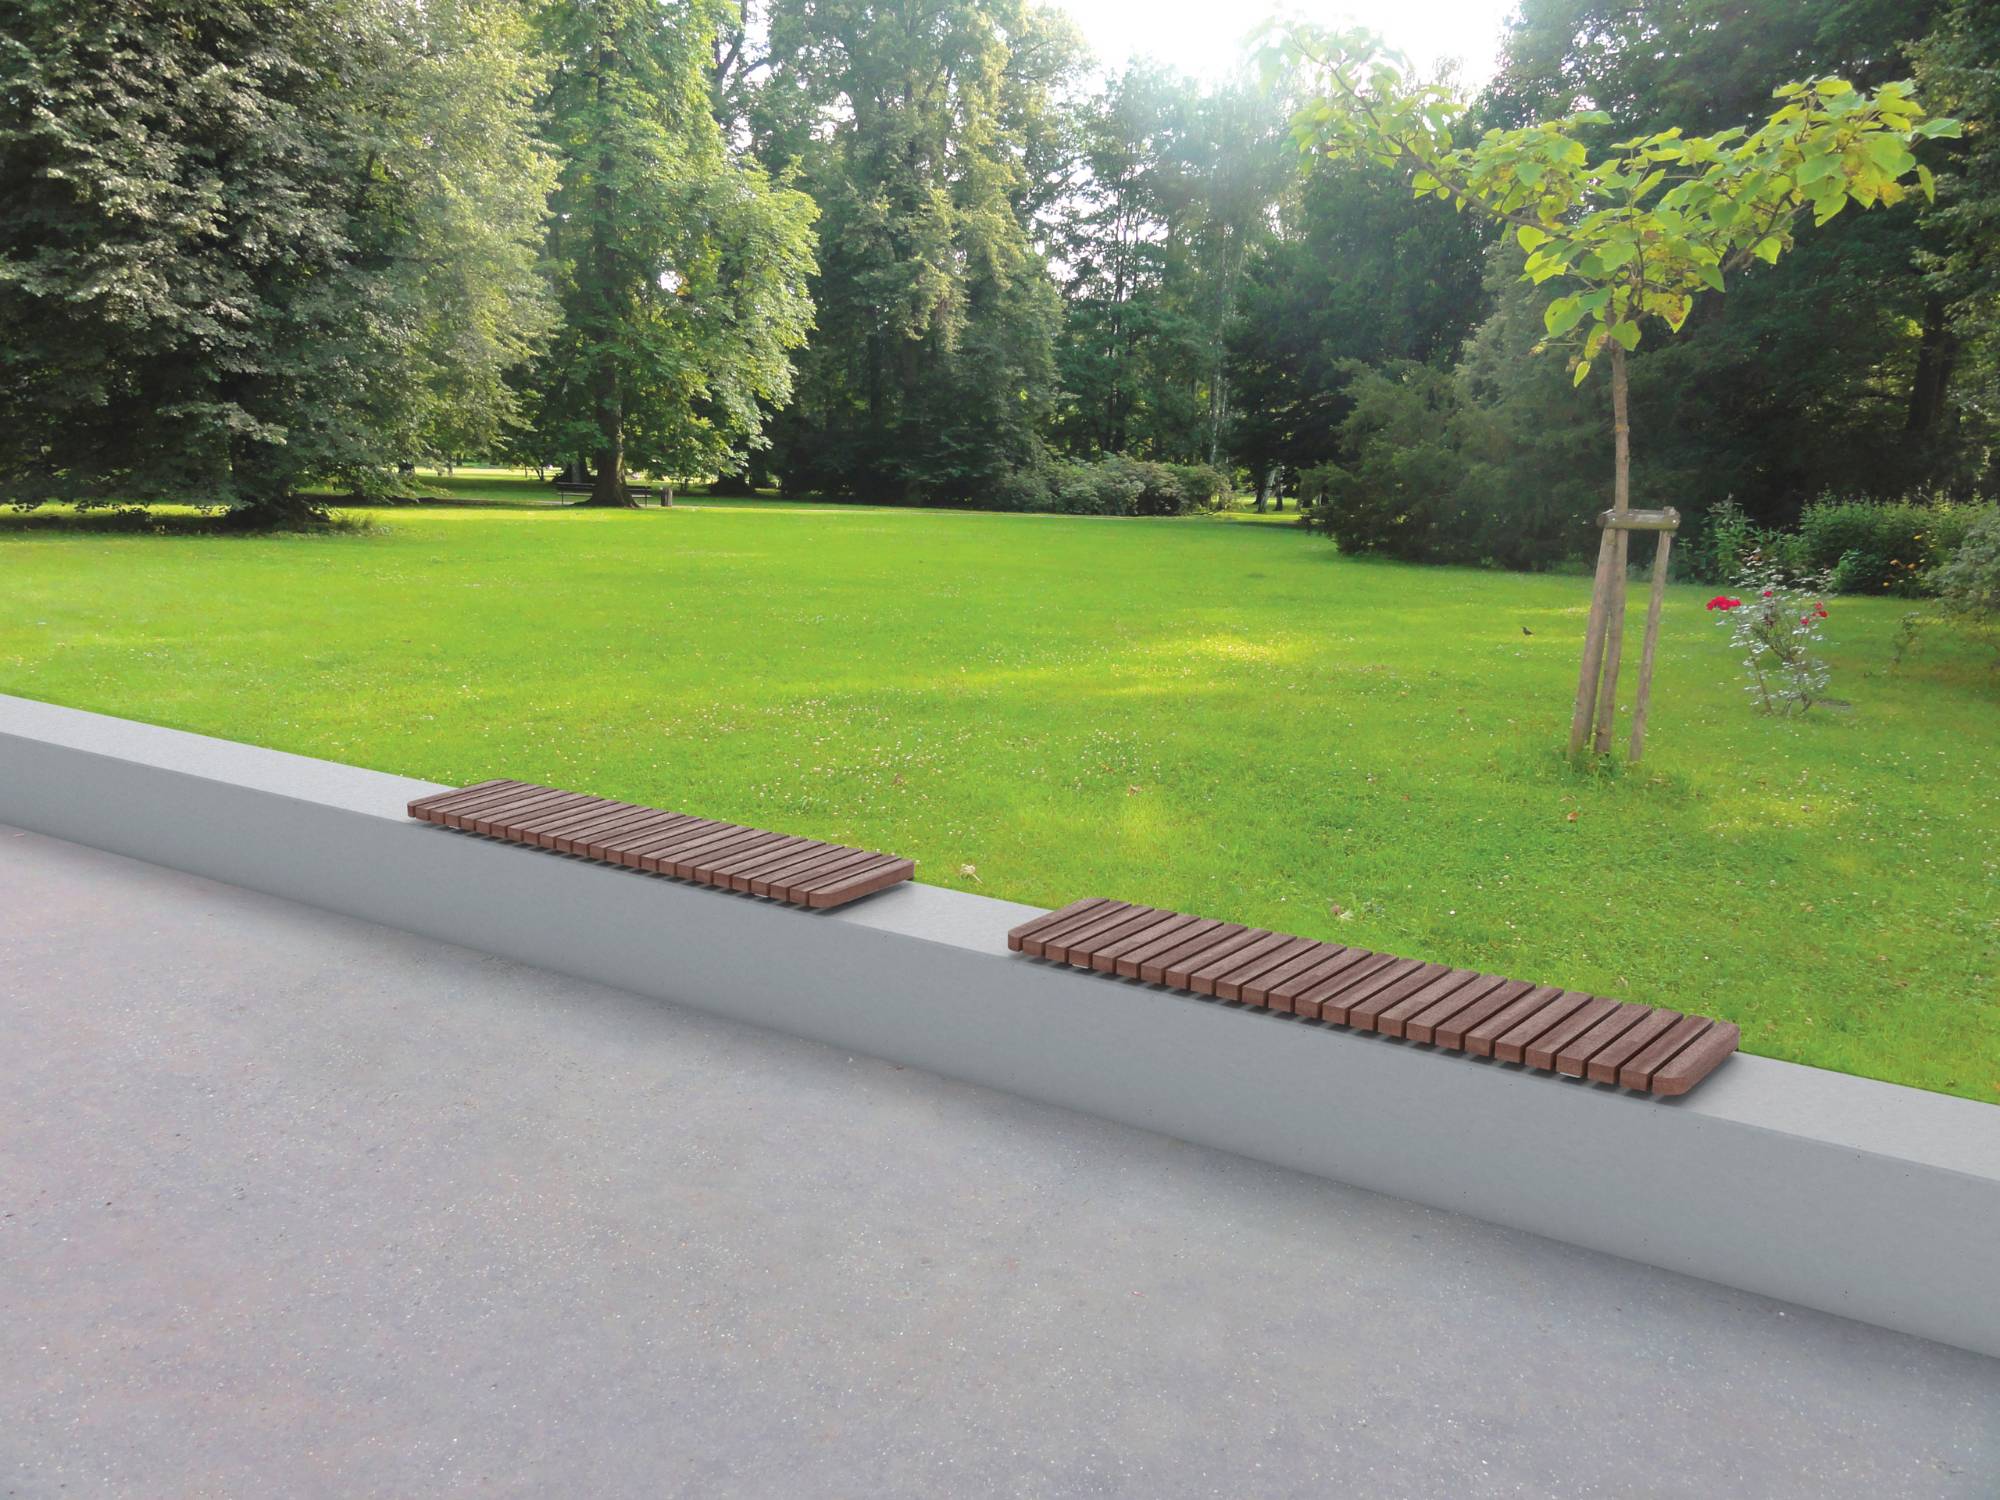 Reforma Bench - Outdoor Seating/ Benches